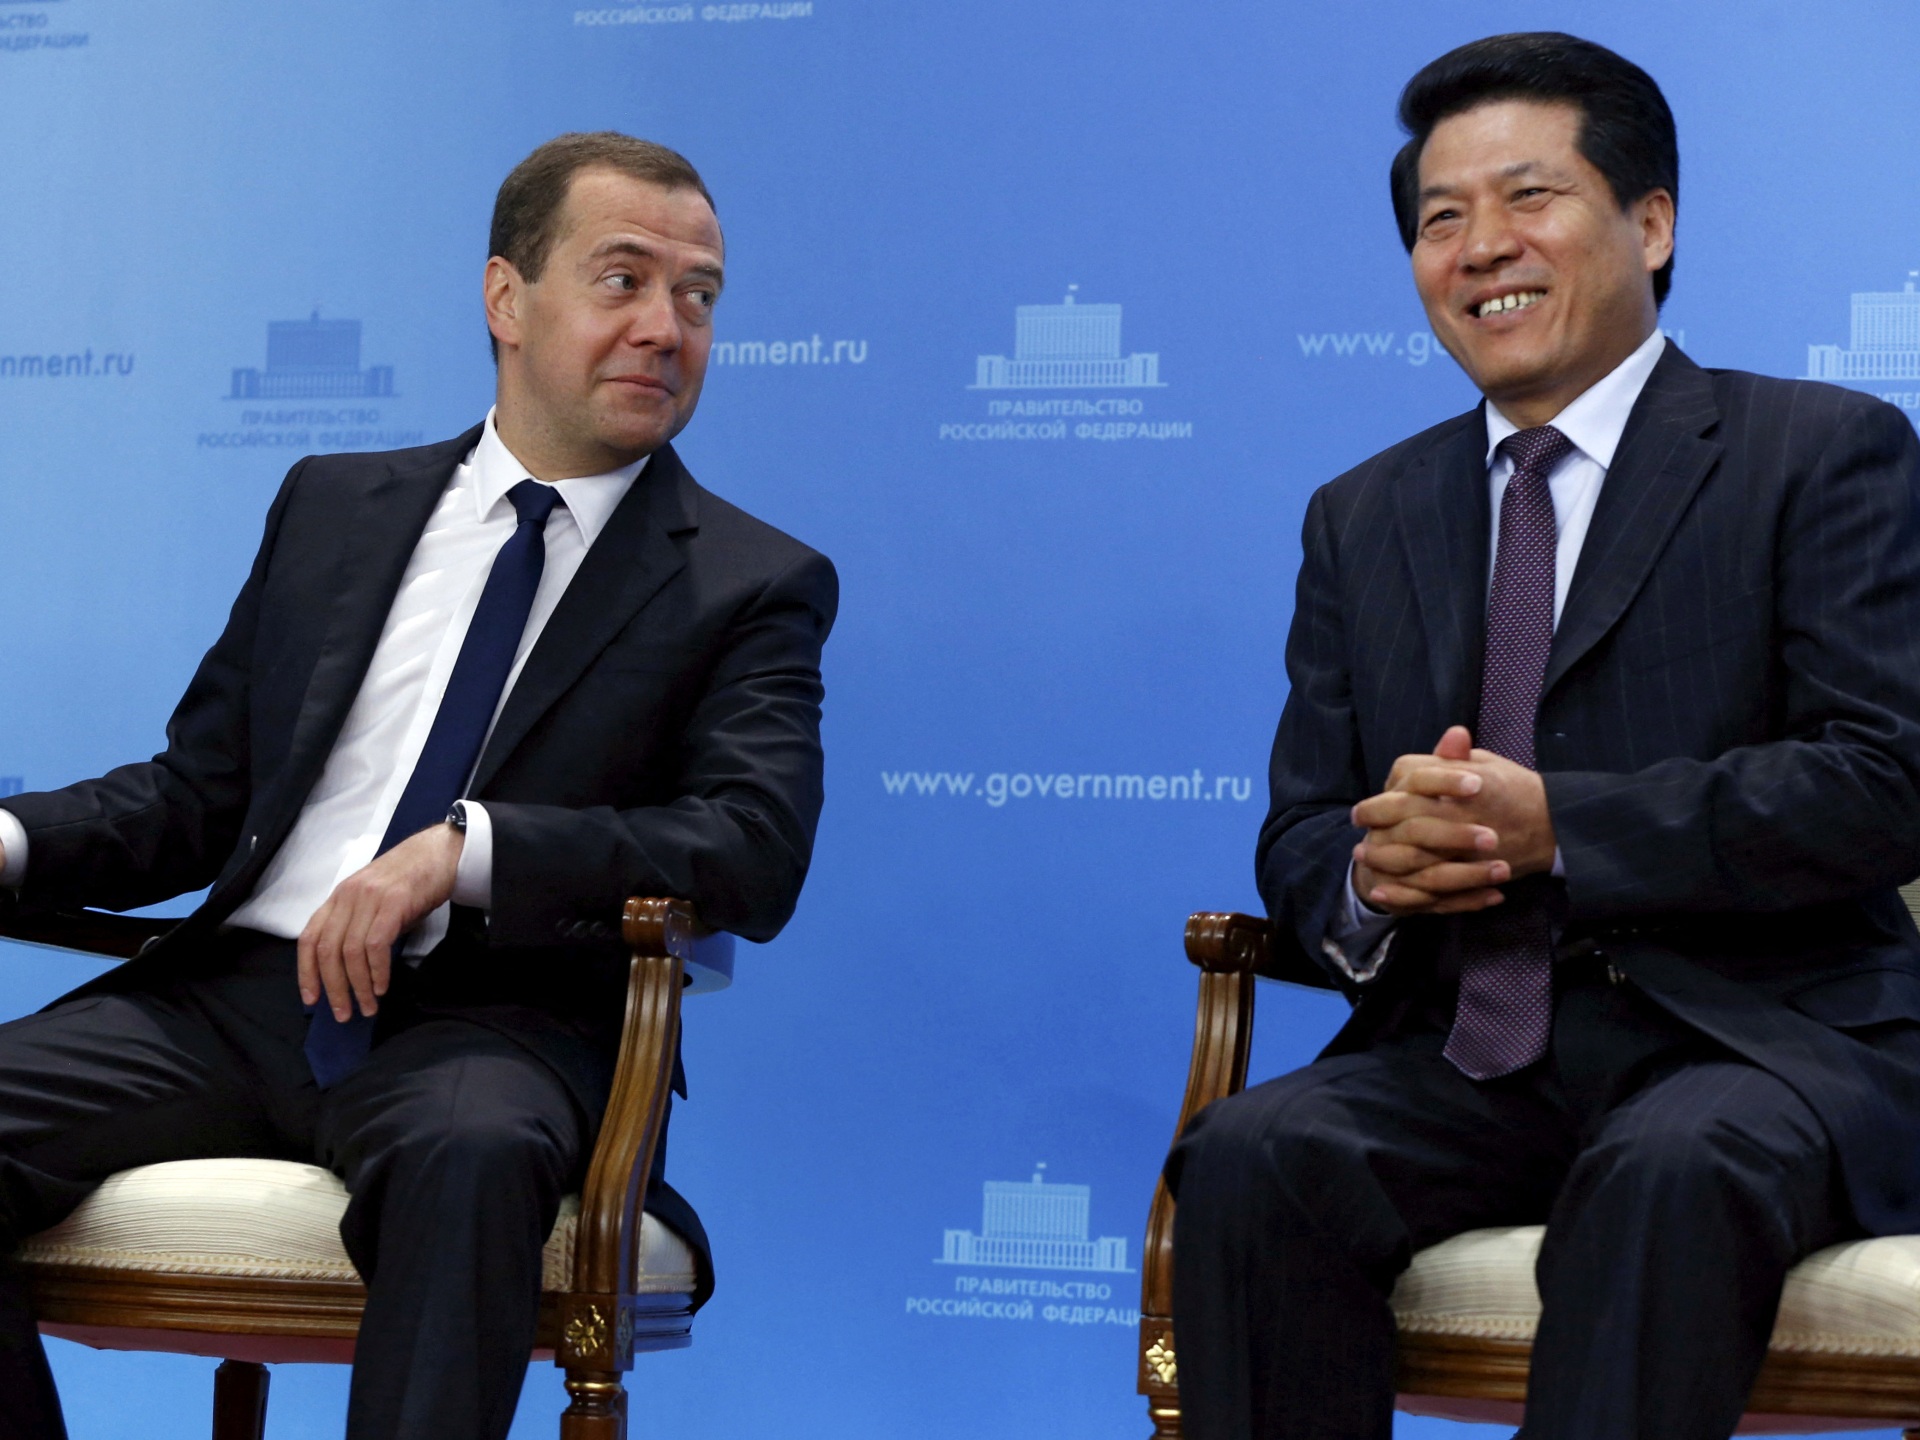 Top Chinese envoy heads to Ukraine, Russia in Europe ‘peace’ tour